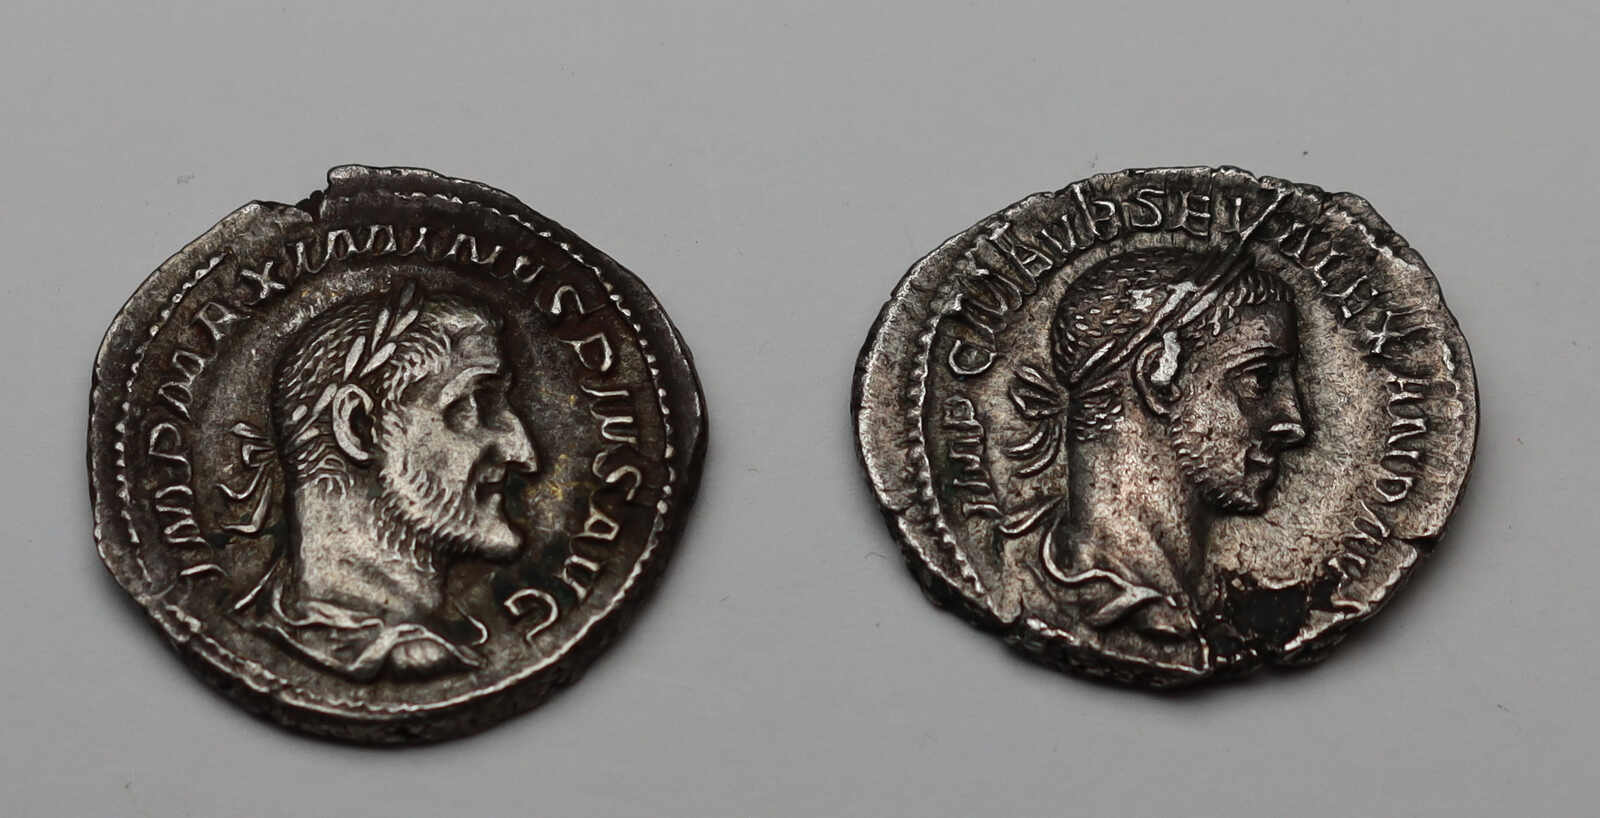 10.30: Ancient Coins - Roman Imperial Coins